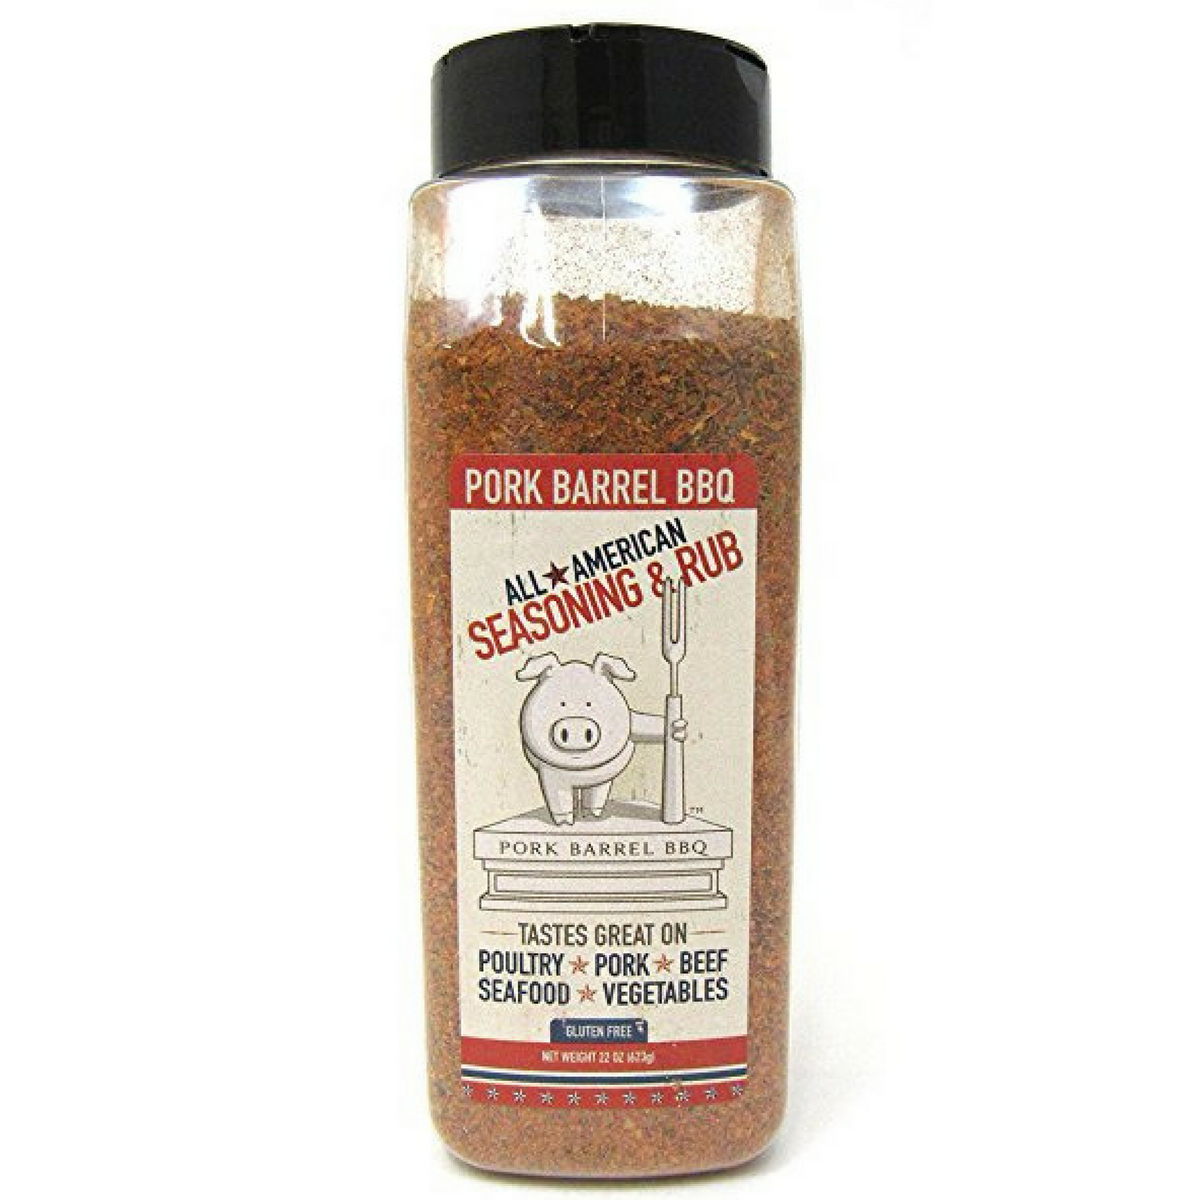 Check out our NEW seasoning blends available exclusively at Sam's